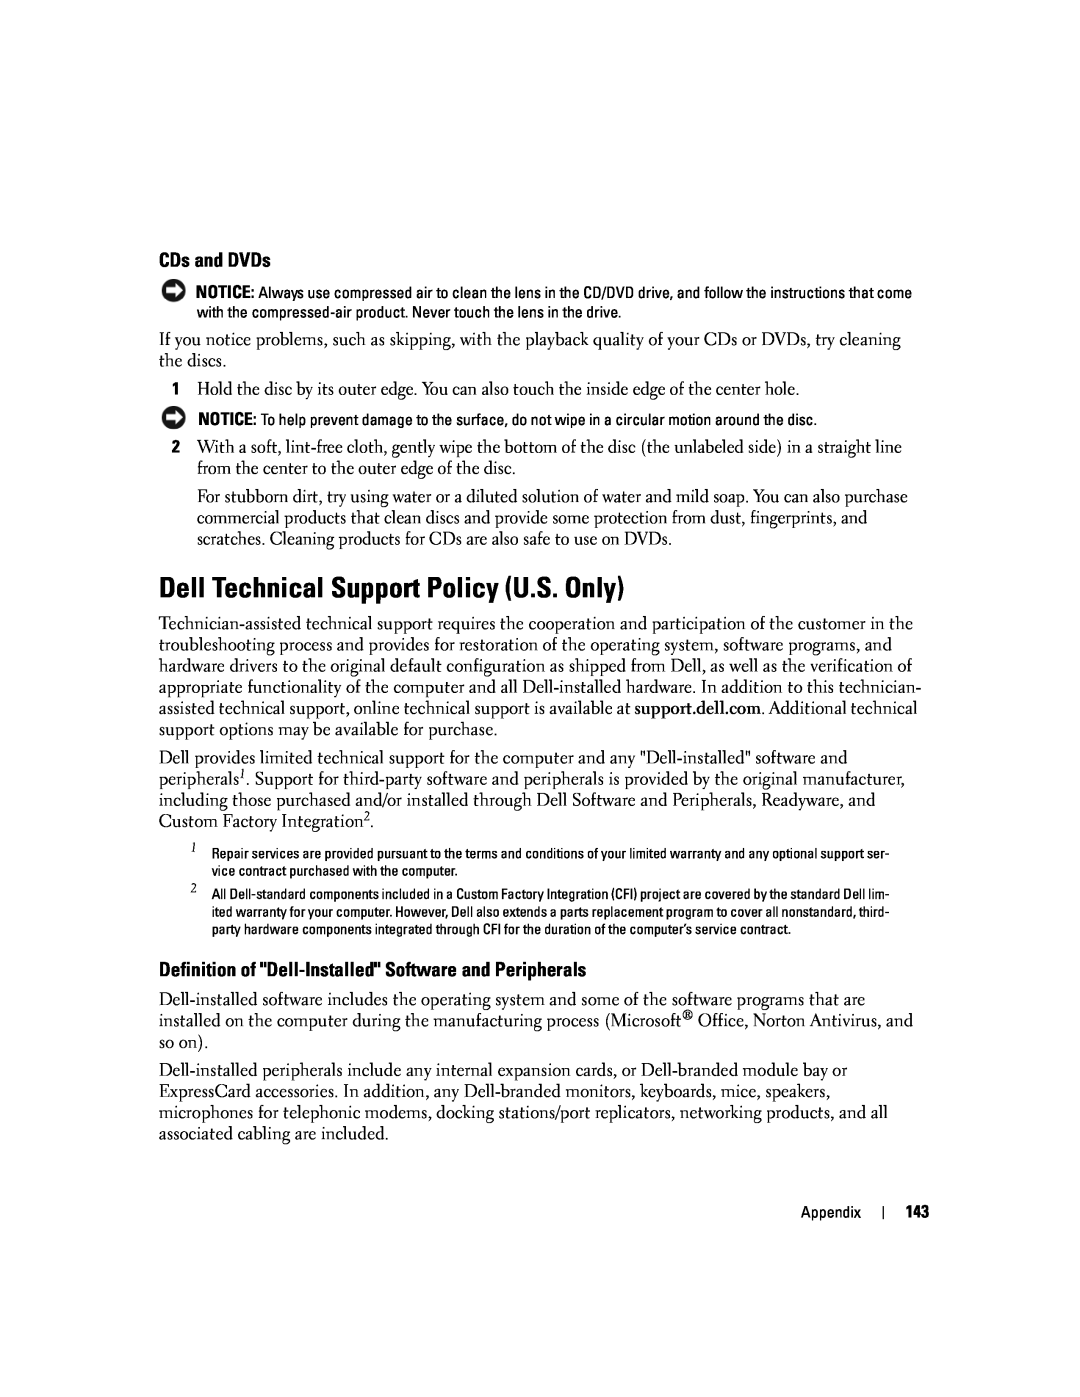 Dell 1501 Dell Technical Support Policy U.S. Only, CDs and DVDs, Definition of Dell-Installed Software and Peripherals 